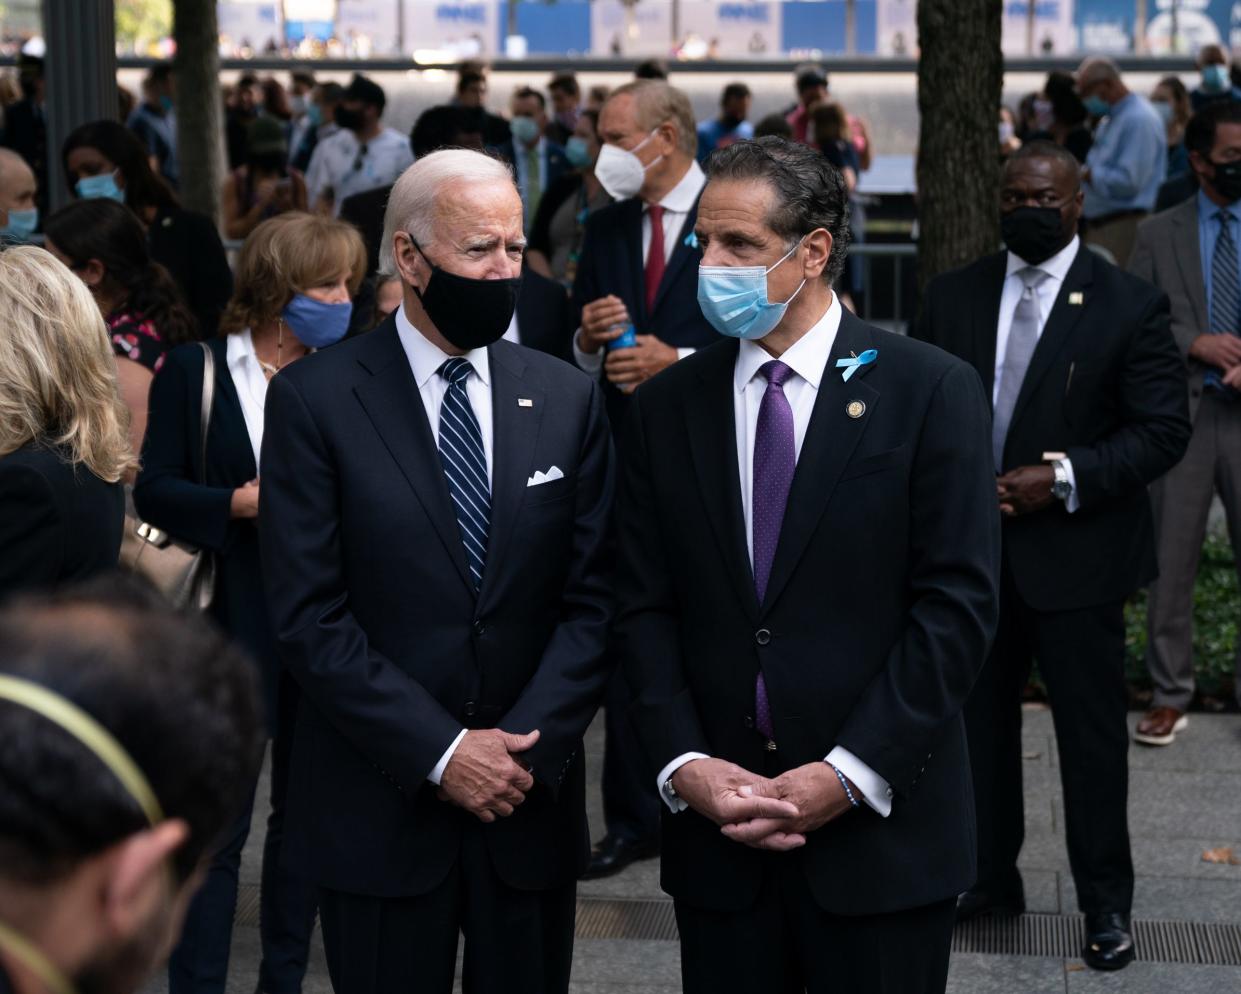 President Joe Biden (left) and New York Governor Andrew Cuomo (right) during 9/11 Commemoration at the 9/11 Memorial in Manhattan in 2020.